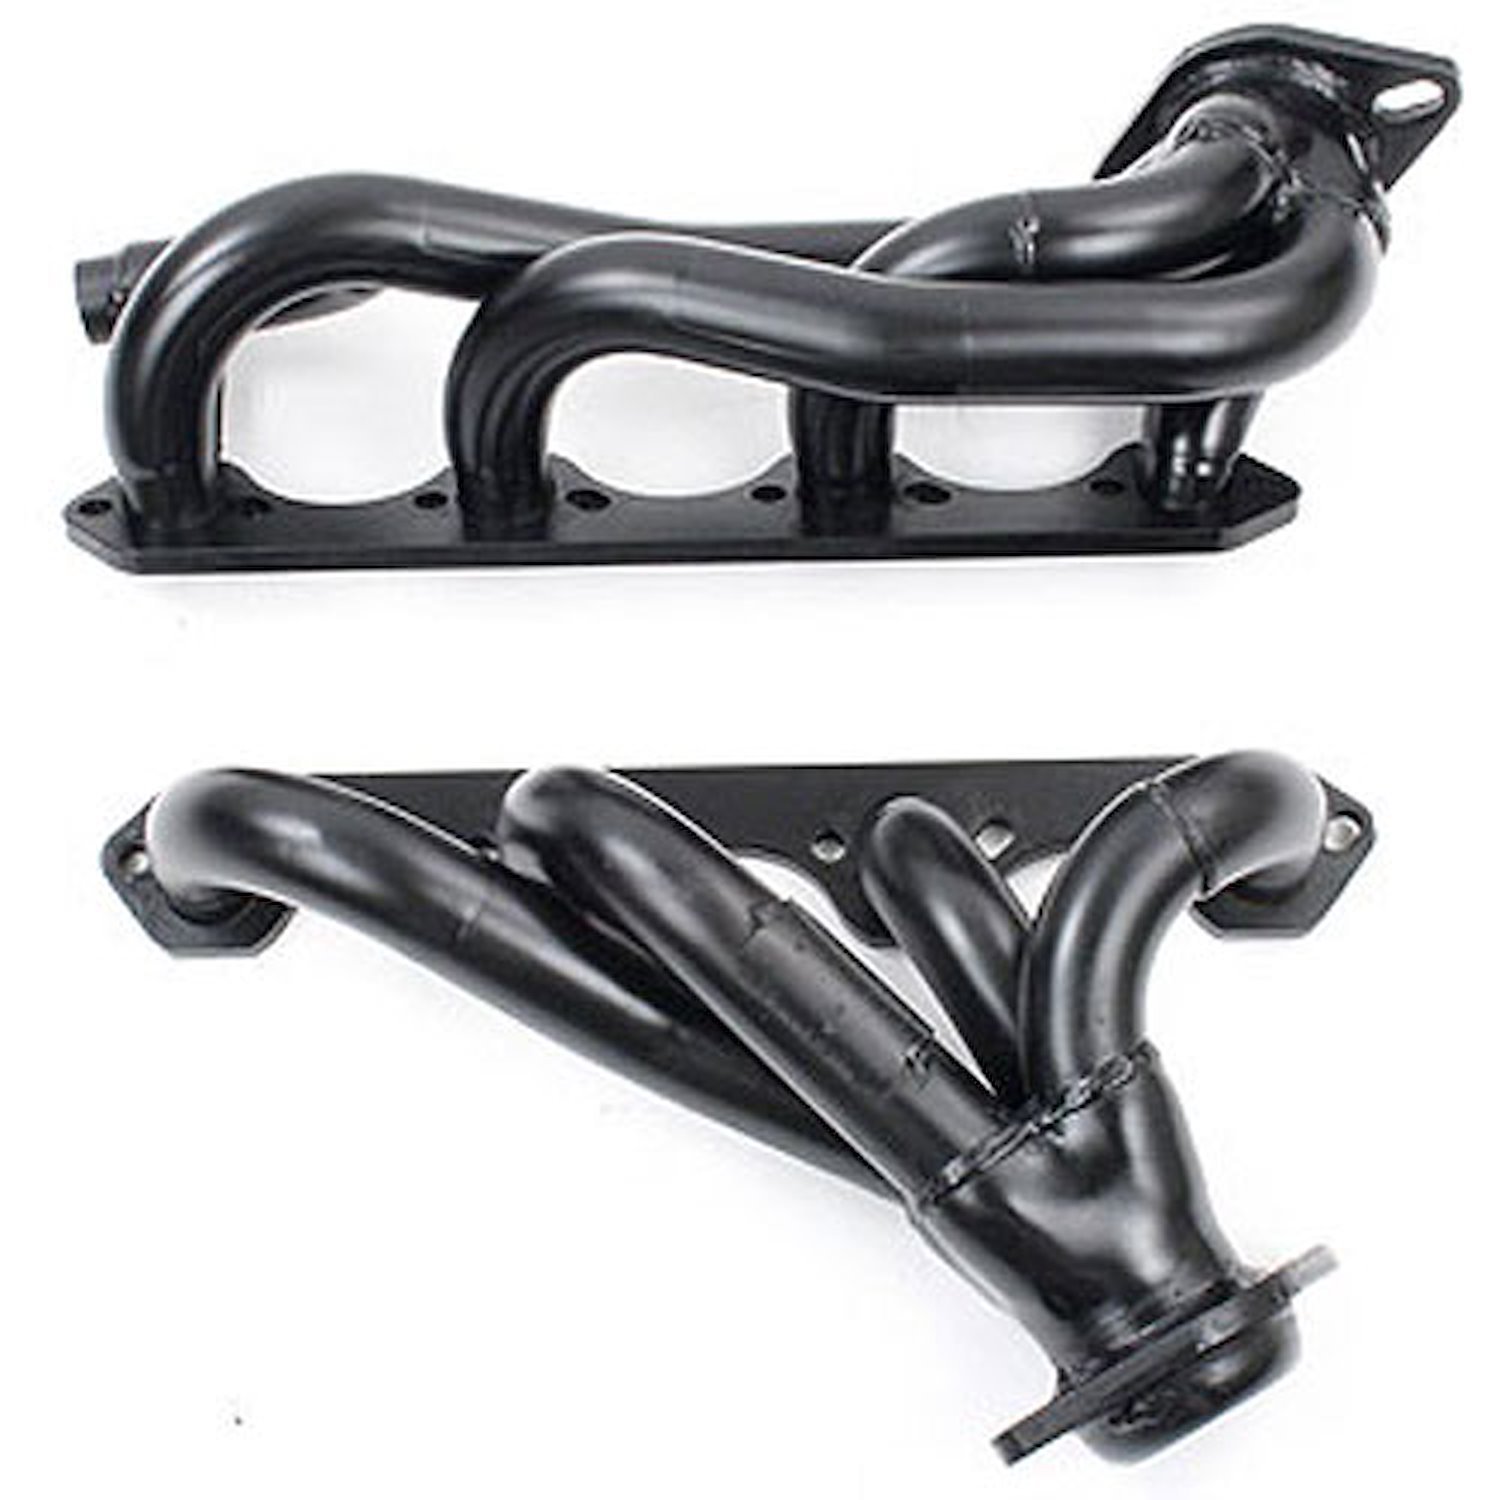 Painted Truck Headers 1996 F-150/F-250 and Bronco 2/4WD 5.8L